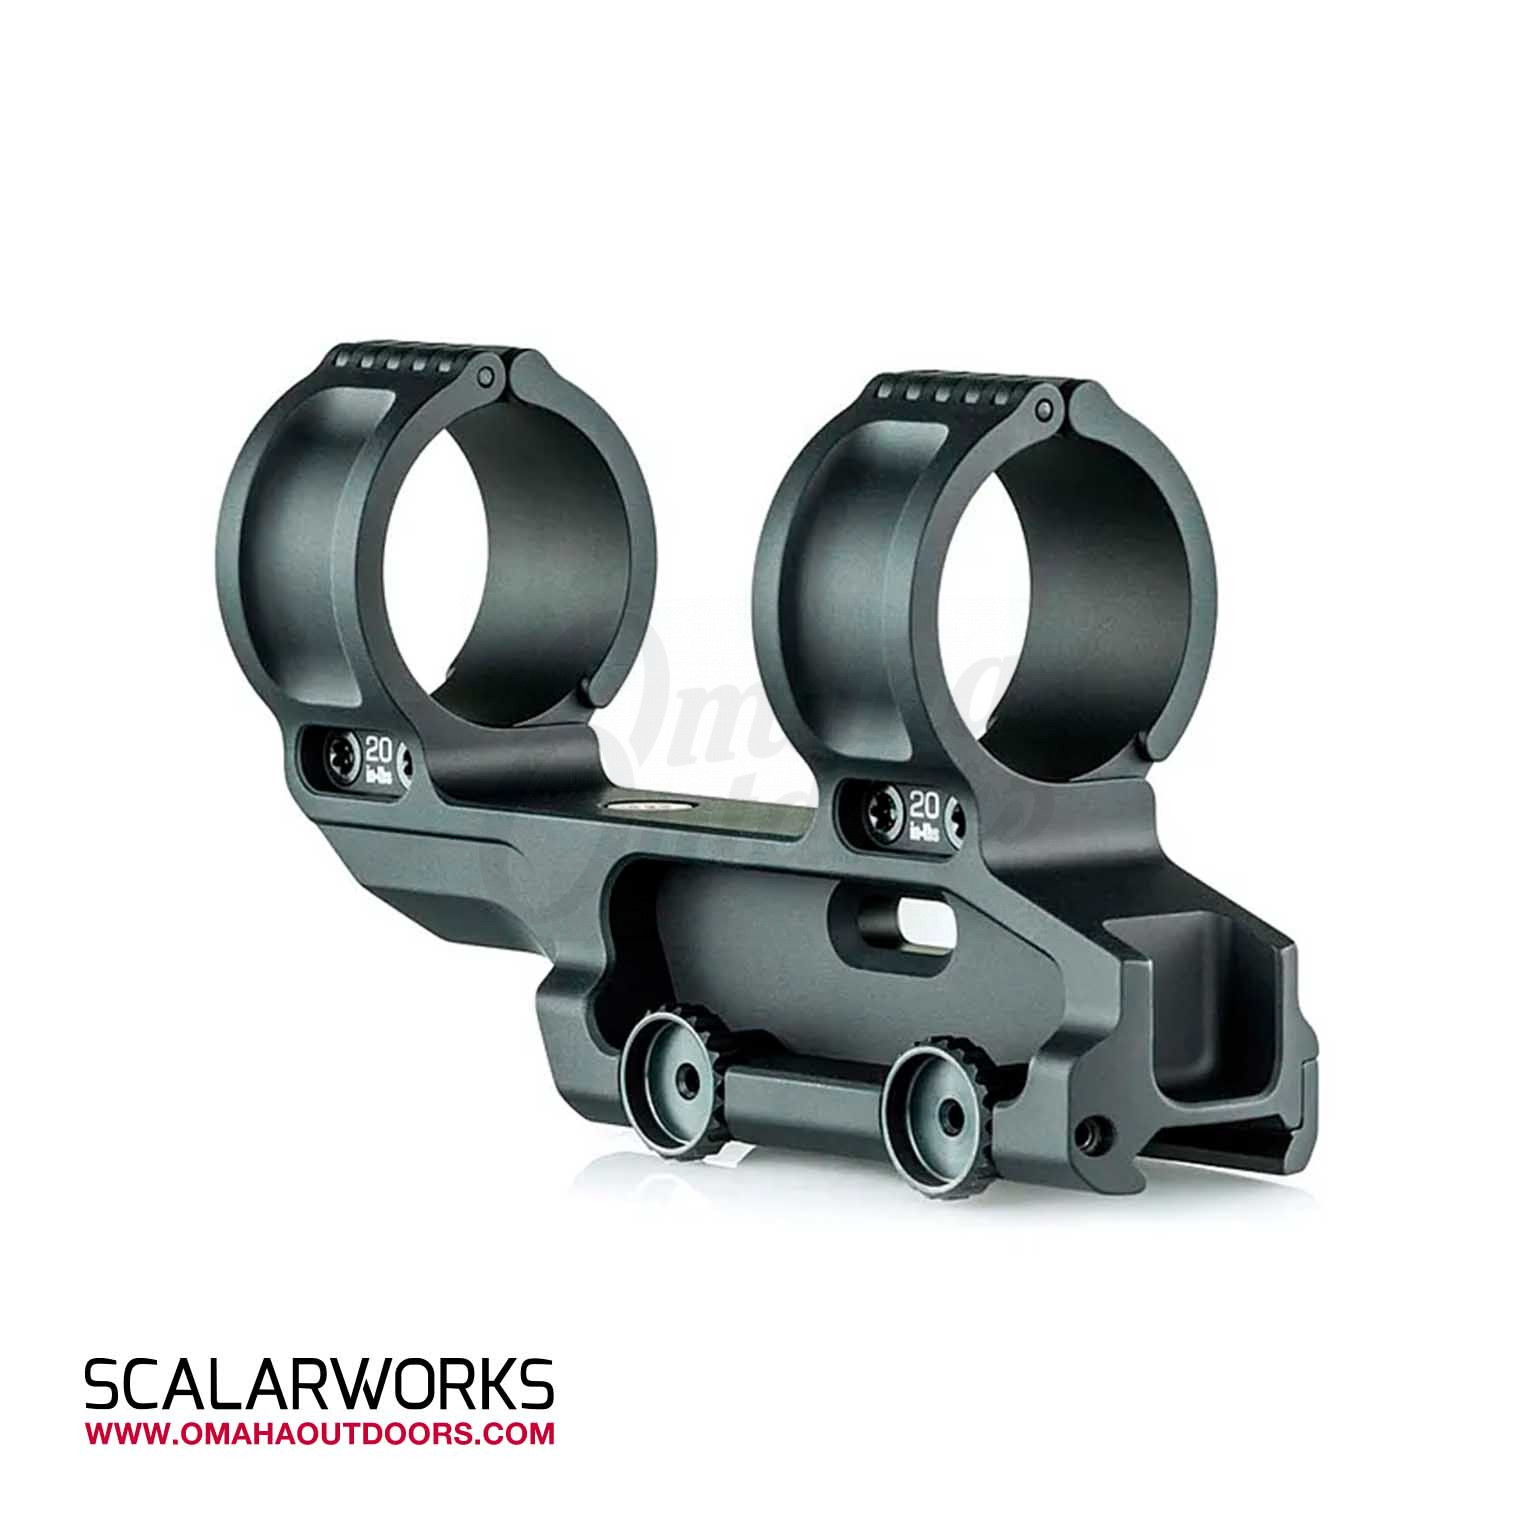 SW0920 SCALARWORKS LEAP 09 34mm Scope Mount 1.93 - Primary Weapons Systems